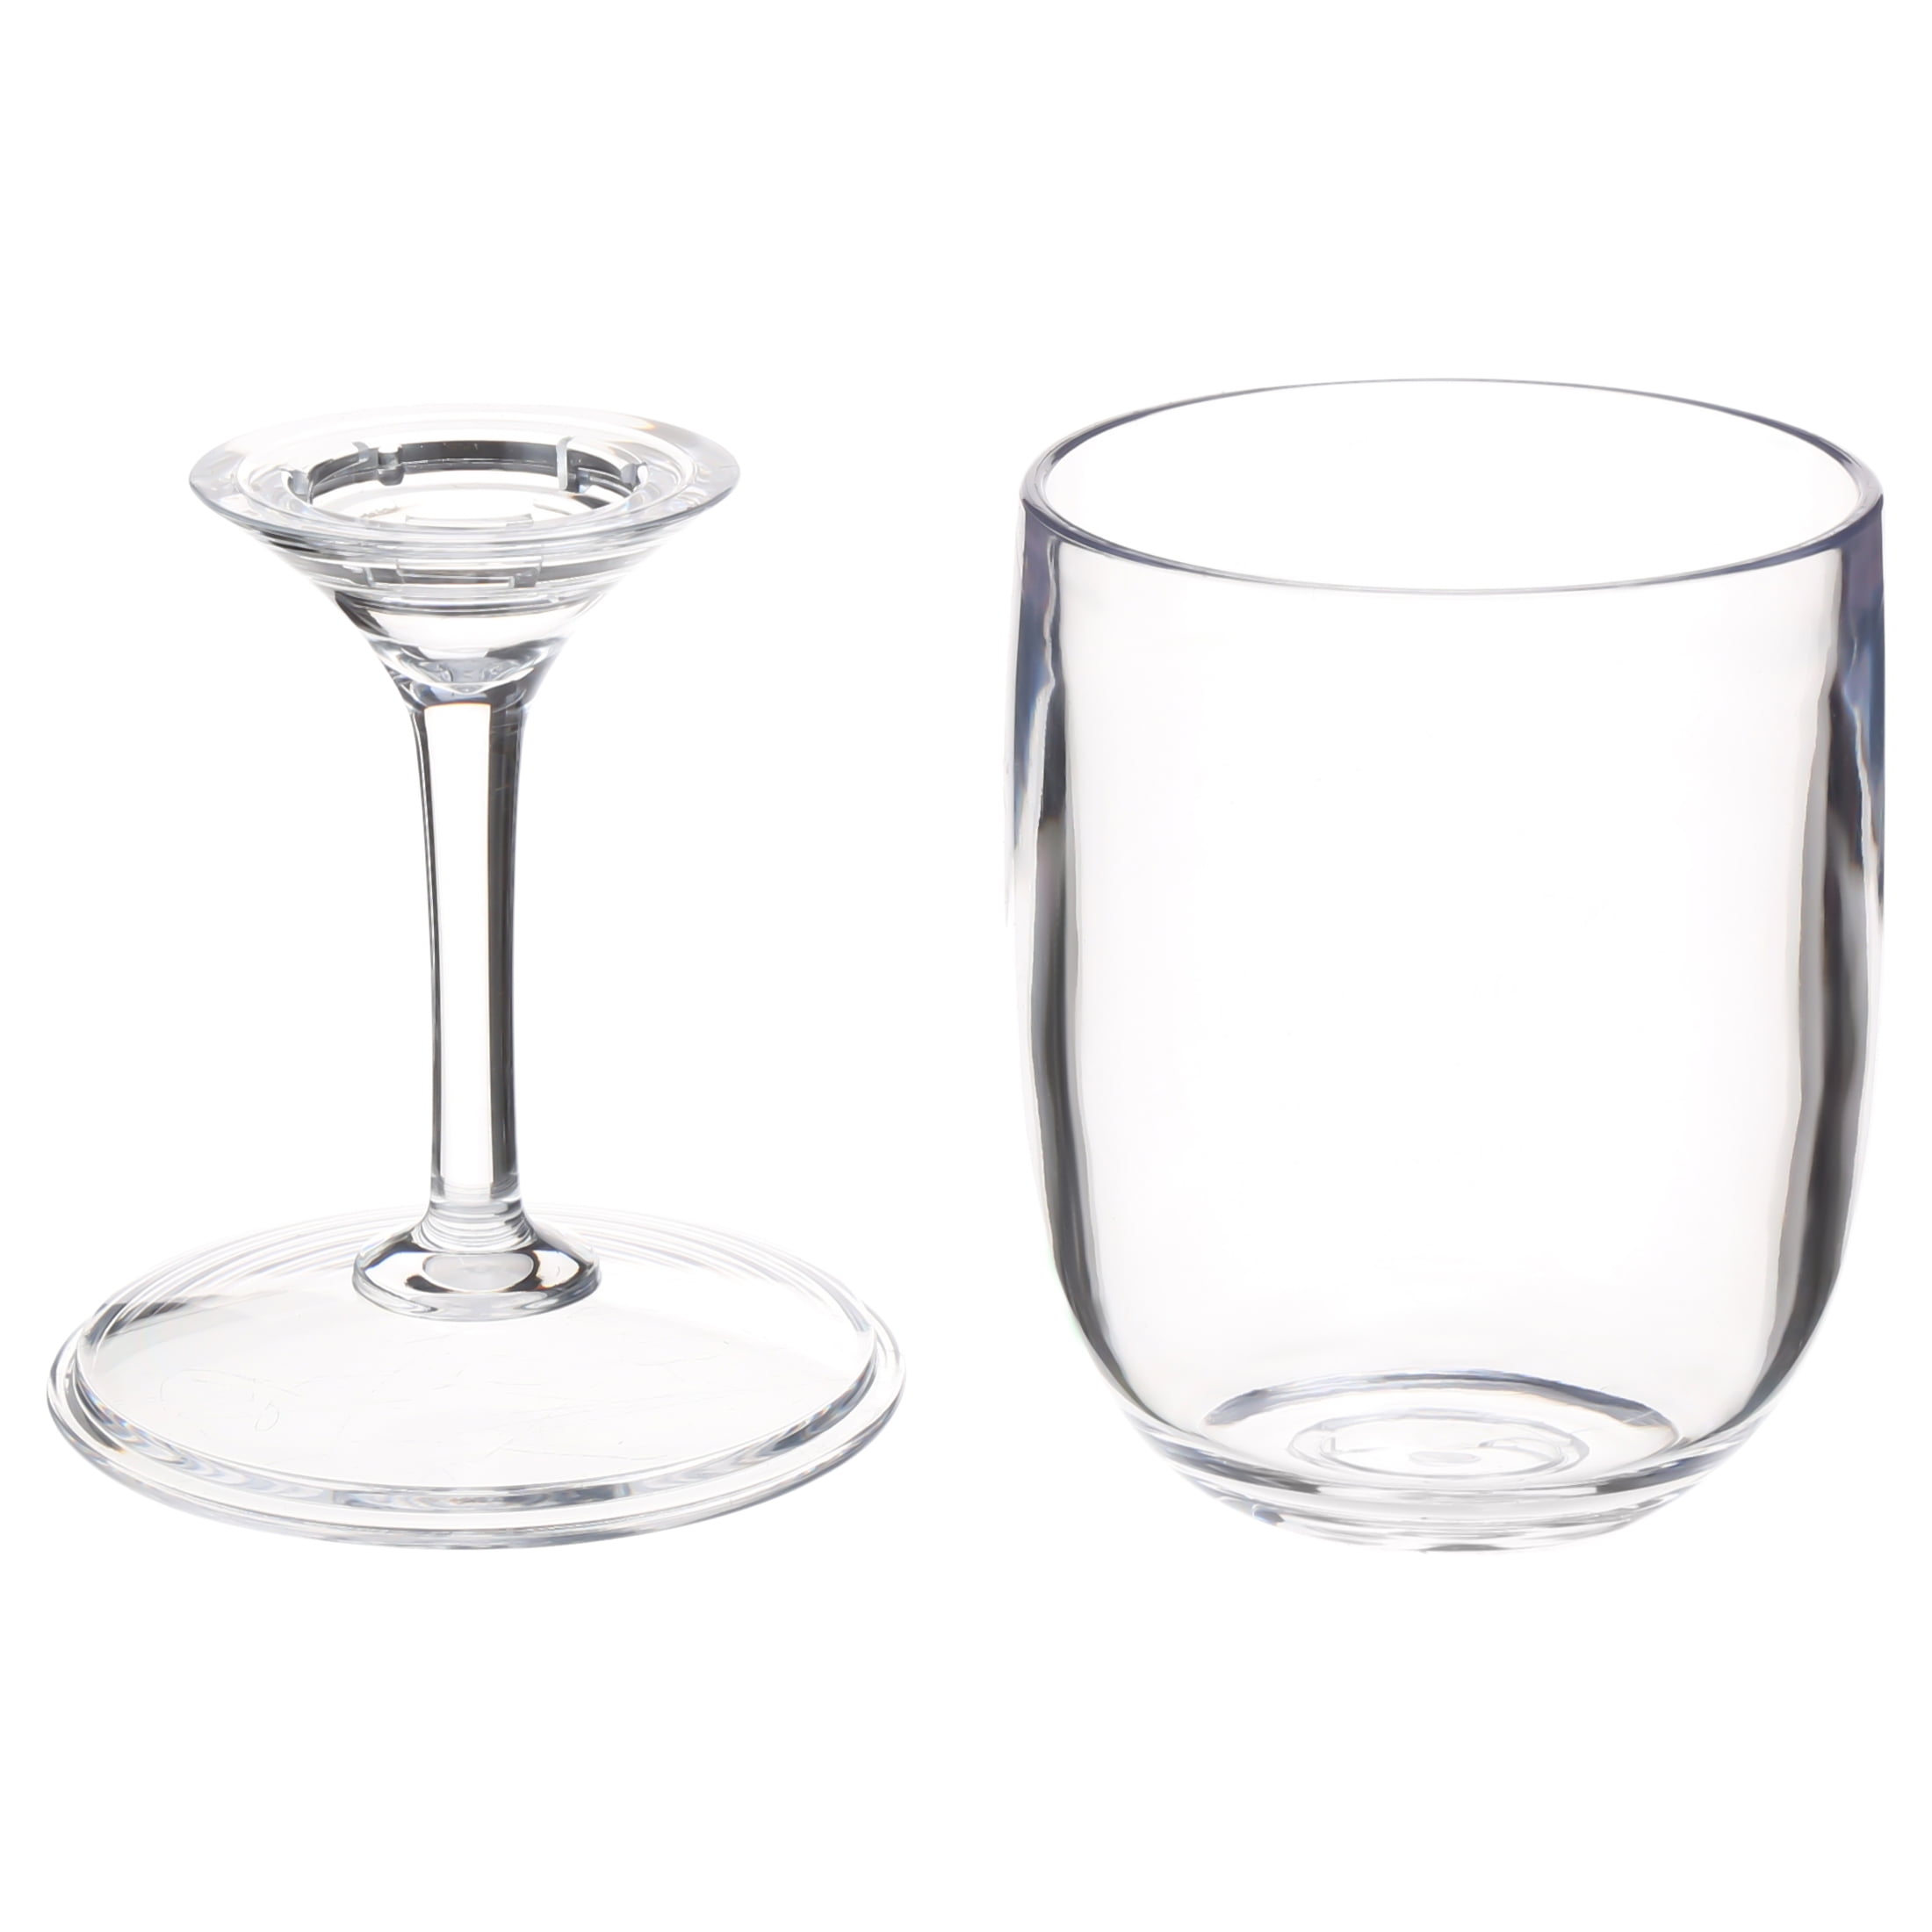 TABLE 12 14.50 oz. White Wine Glasses (Set of 6) TGW6R30 - The Home Depot